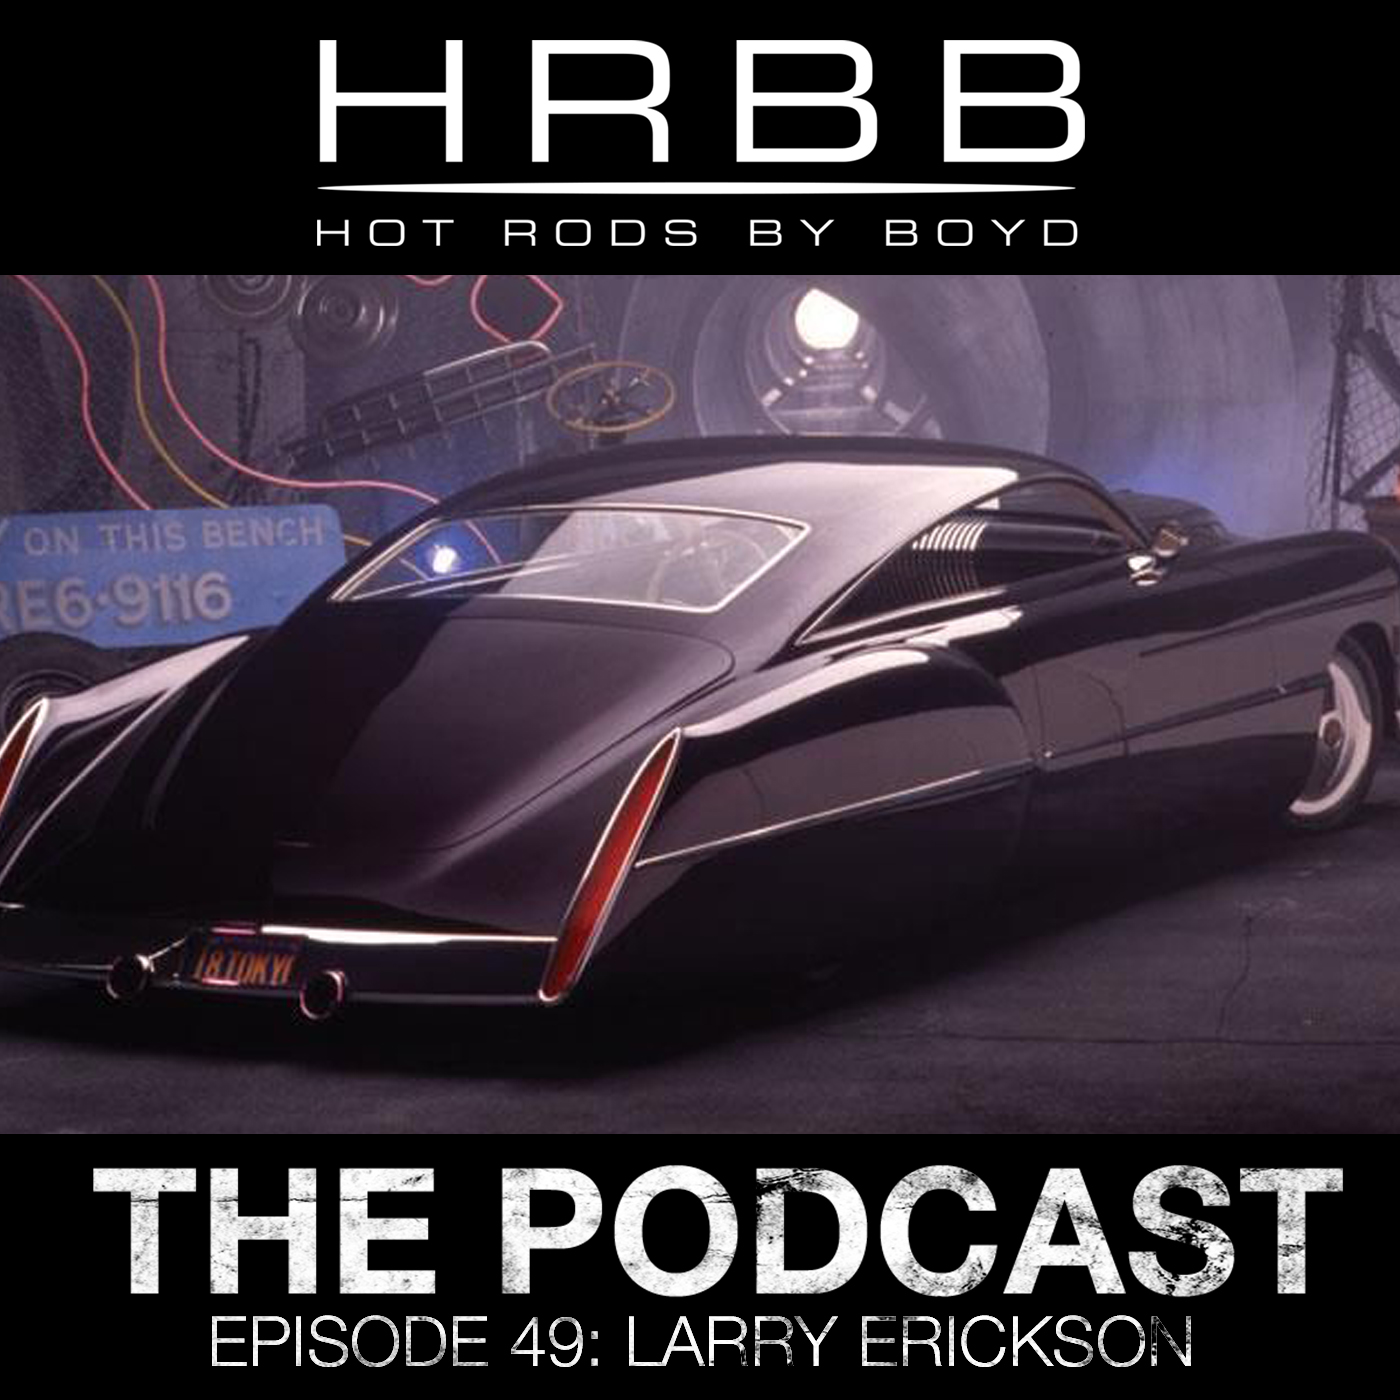 Hot Rods By Boyd Ep 49 - Larry Erickson